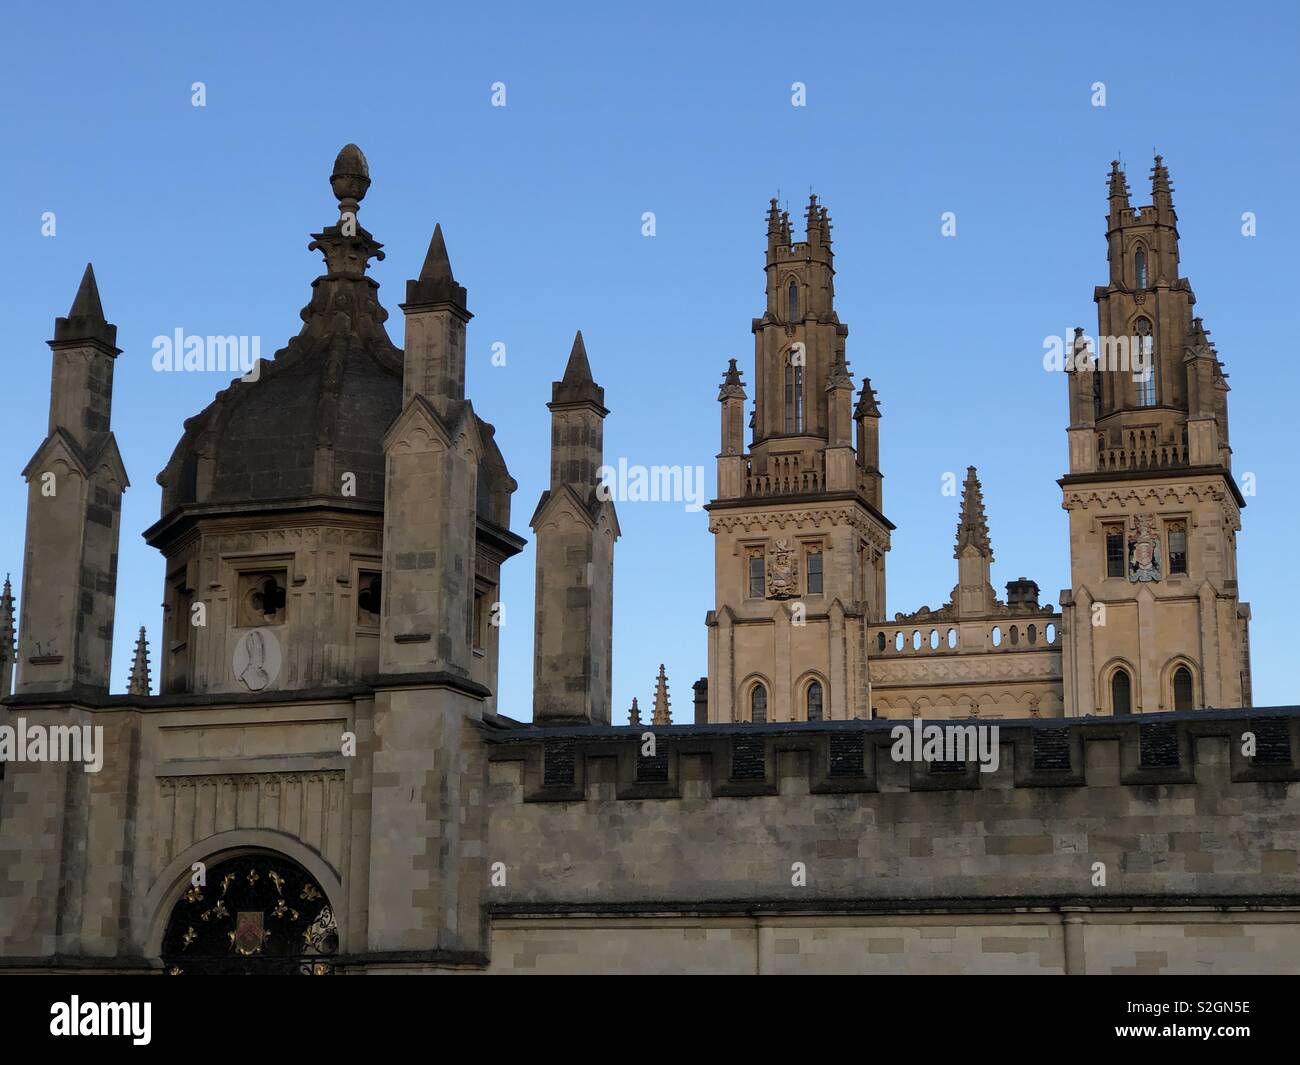 View of some of the ‘dreaming spires’ of Oxford, at All Souls College, Oxford University; an atmospheric view at sunset including the famous twin towers of Nicholas Hawksmoor. Stock Photo